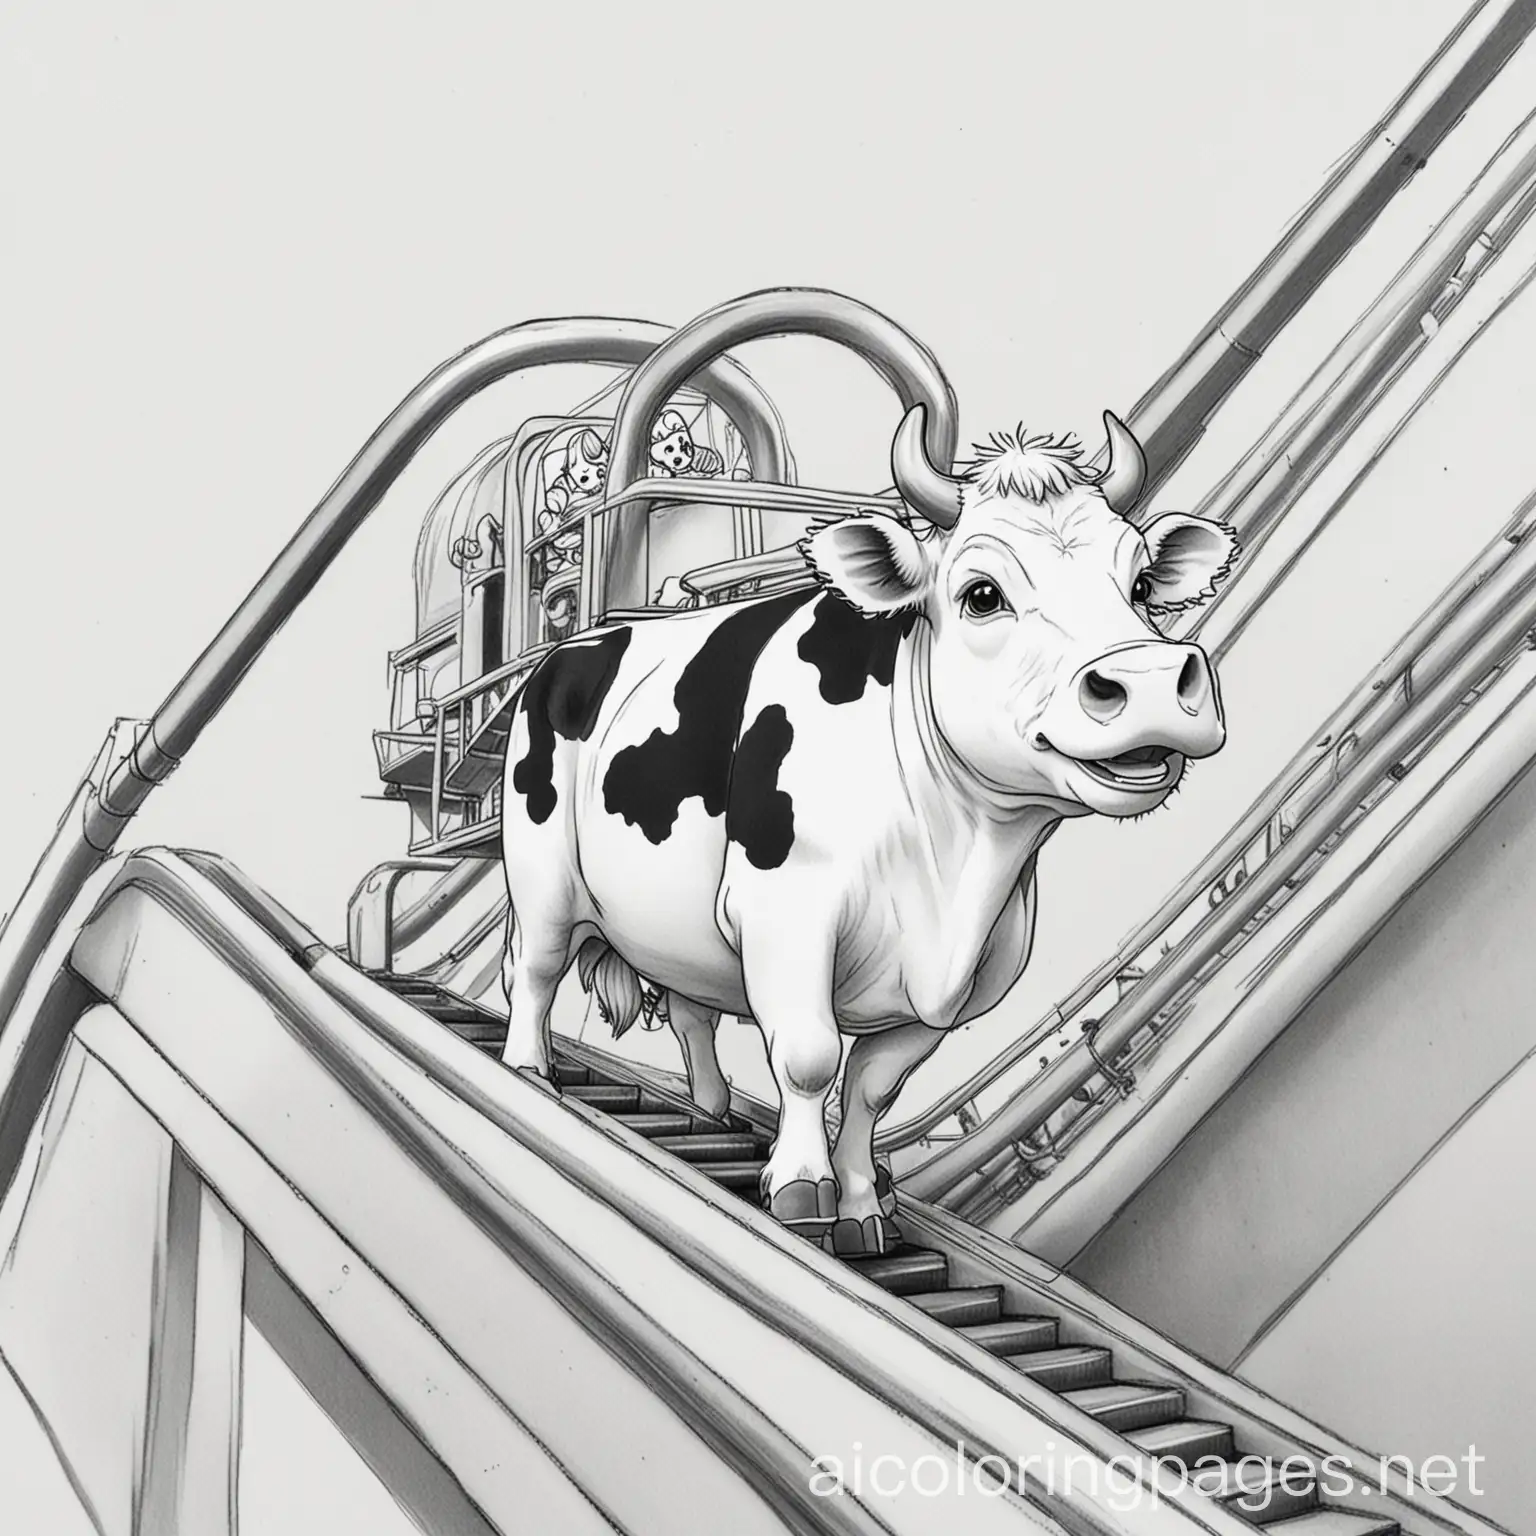 Cute-Cow-Riding-Escalator-Coloring-Page-for-Kids